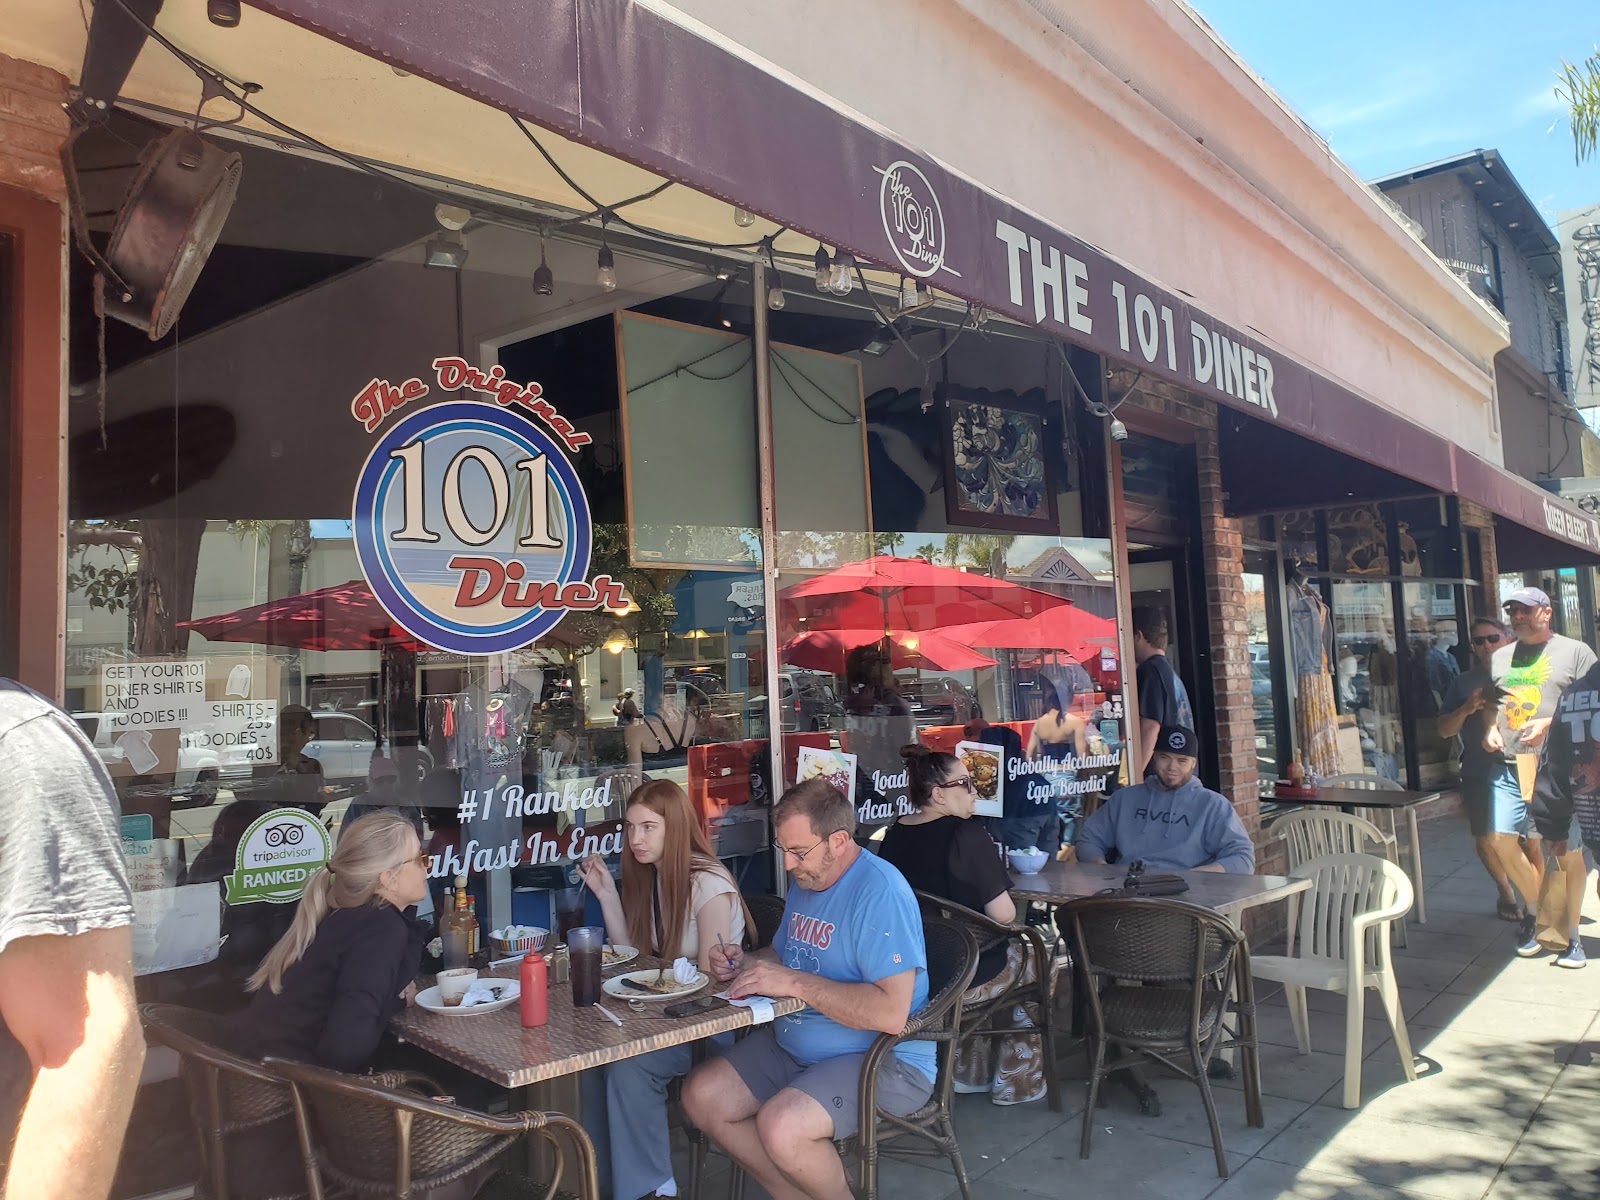 The 101 Diner